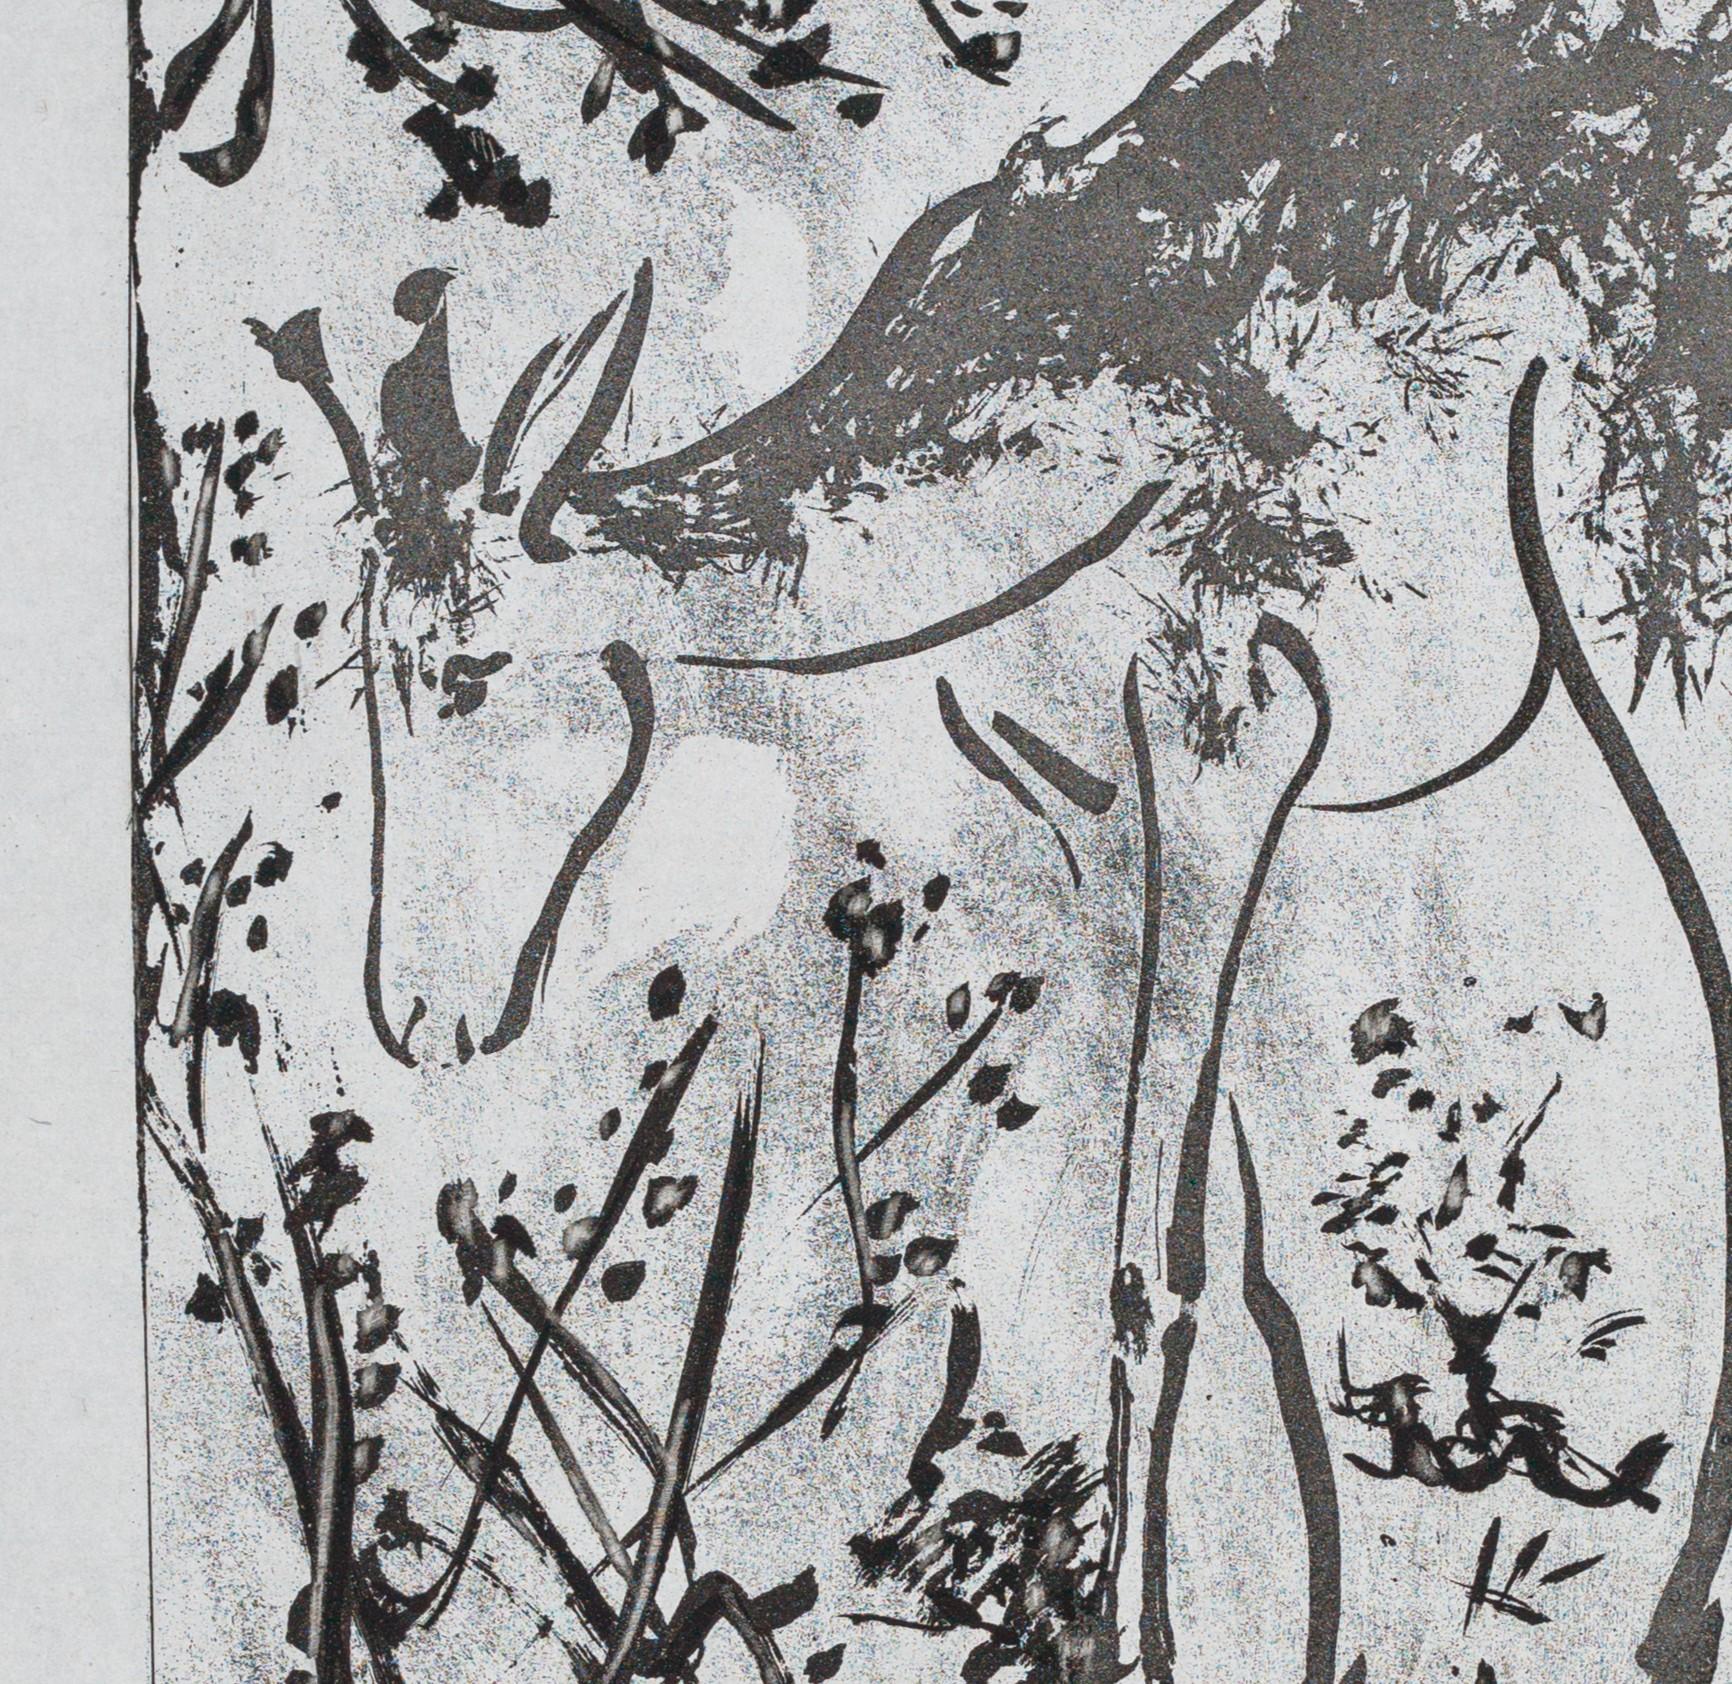 The Deer is an aquatint and drypoint print on chine from one of the deluxe copies of Picasso's 1942 Histoire Naturelle - Textes de Buffon series. The image size is 10.5 x 8.15 inches, unsigned as issued, and framed in a contemporary silver and gray